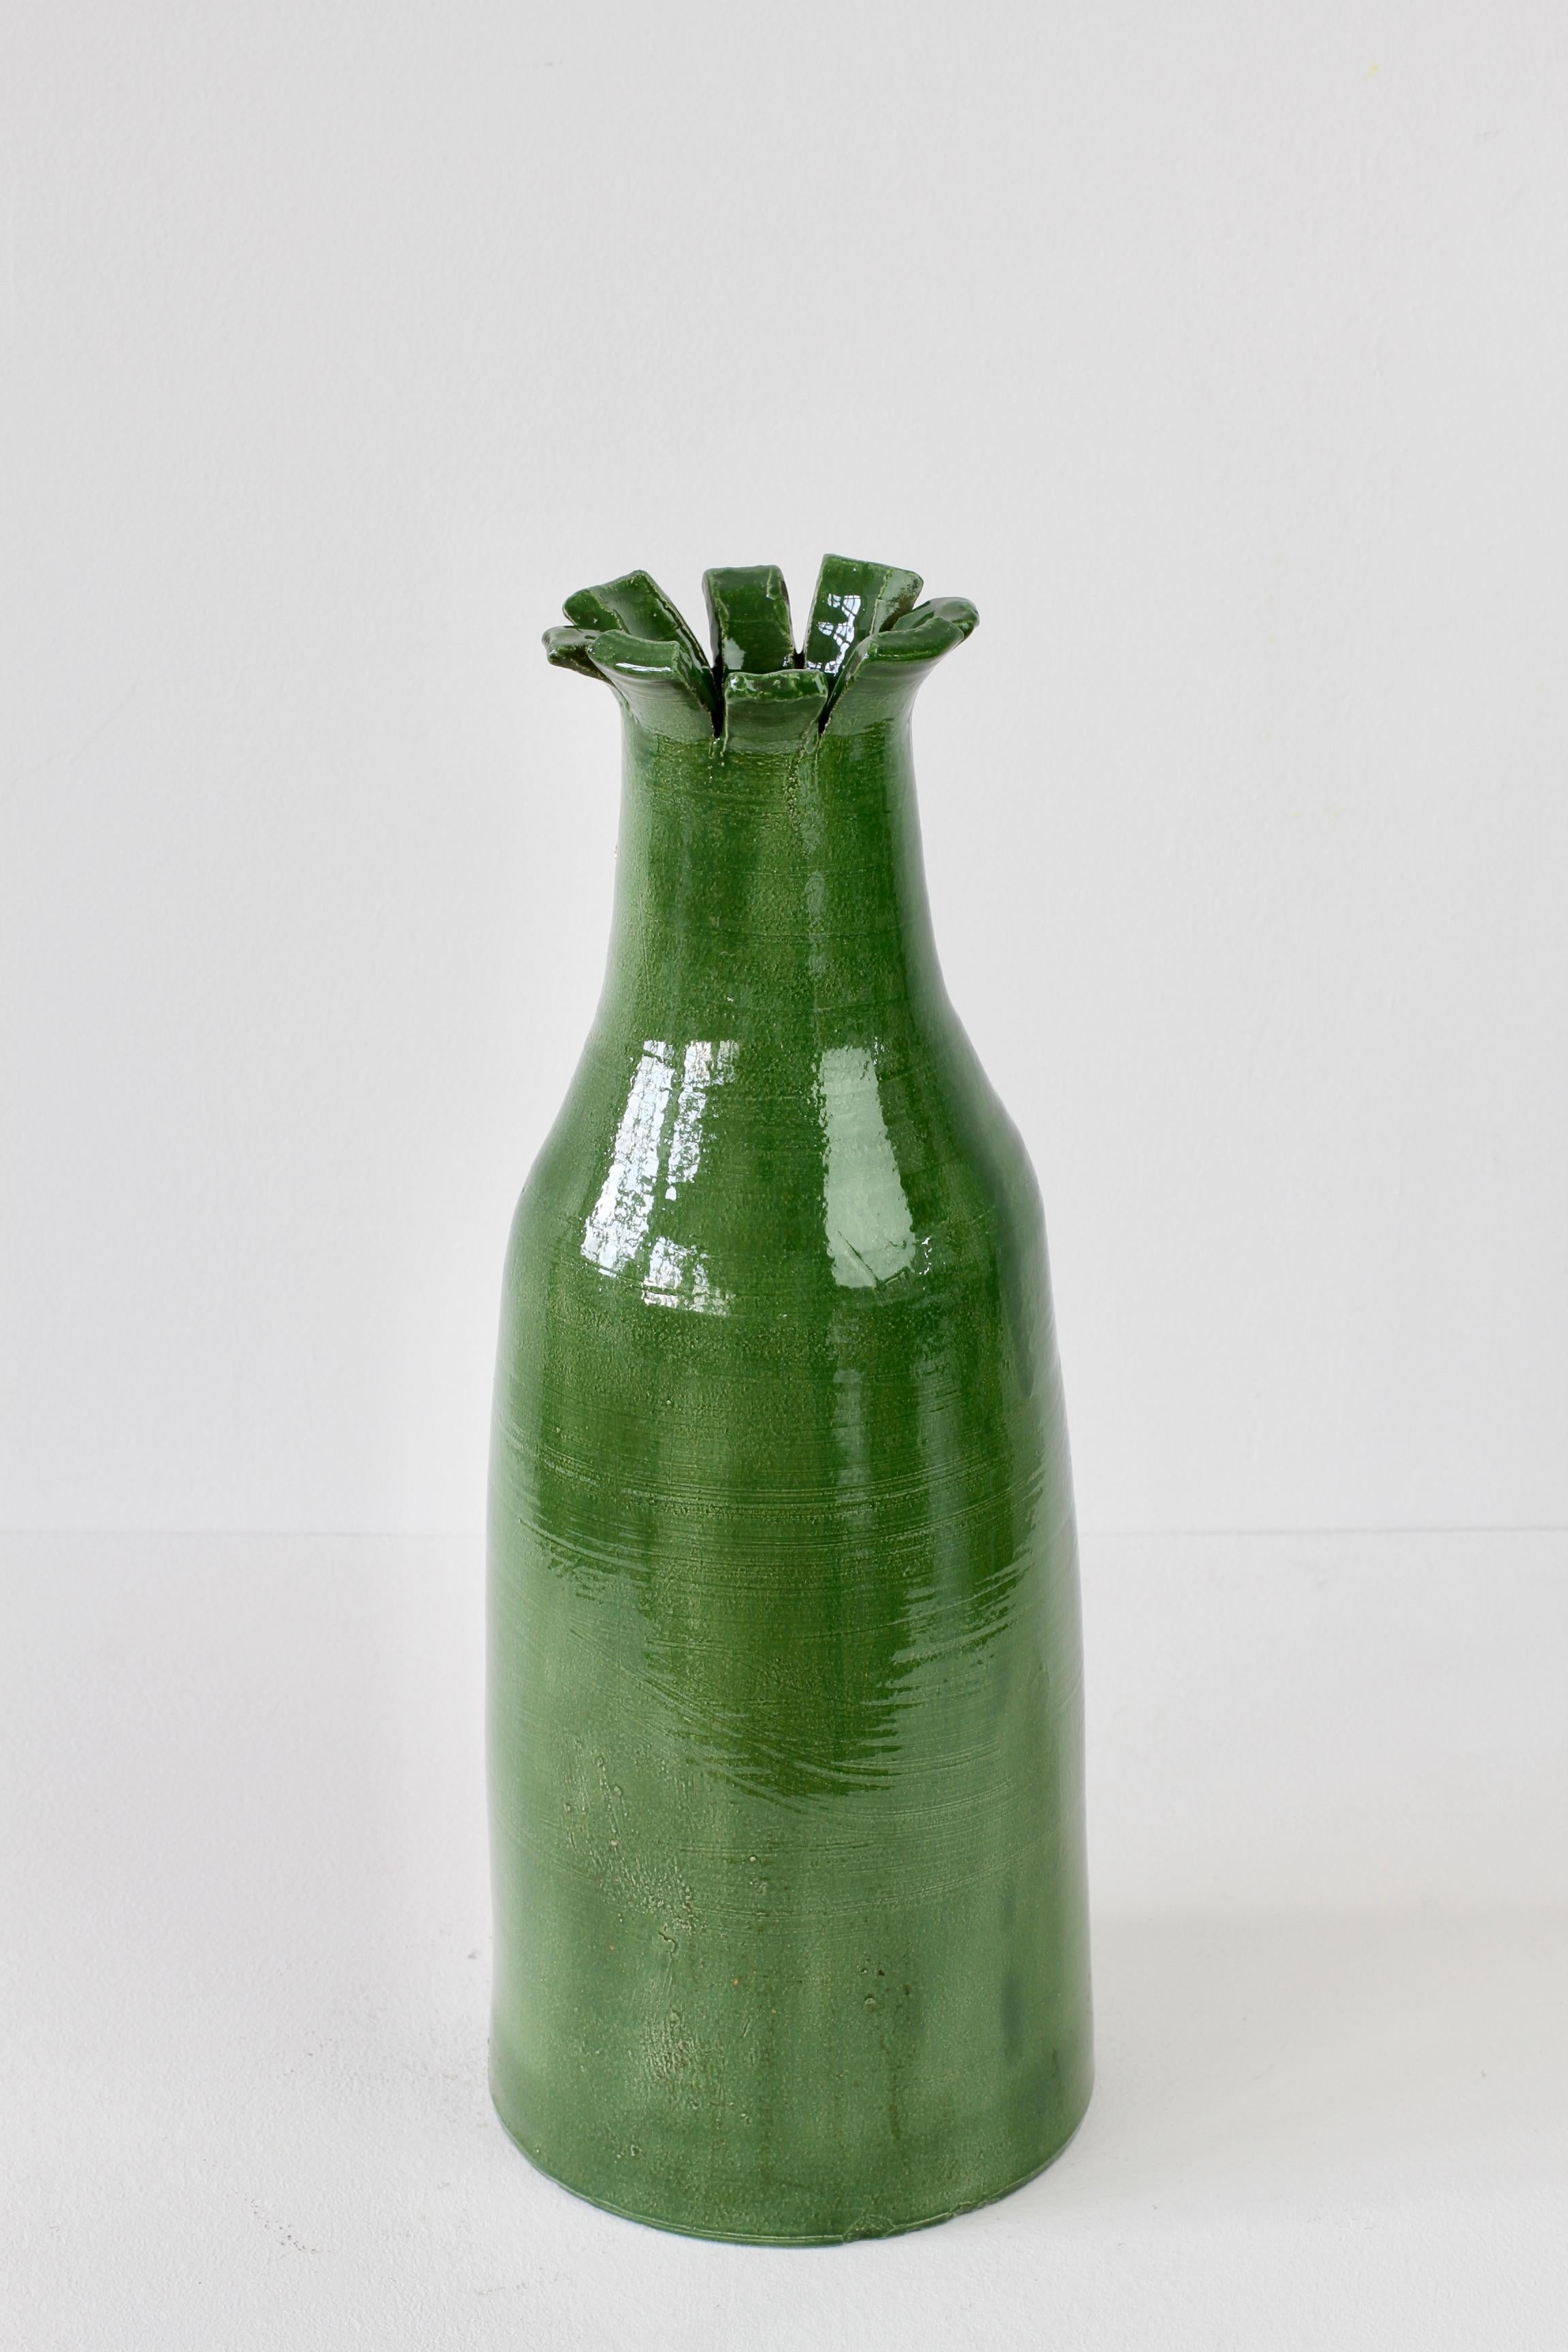 20th Century Rare and Important Tall Hand Thrown Vase by Claus Moroder, Austria circa 1960s